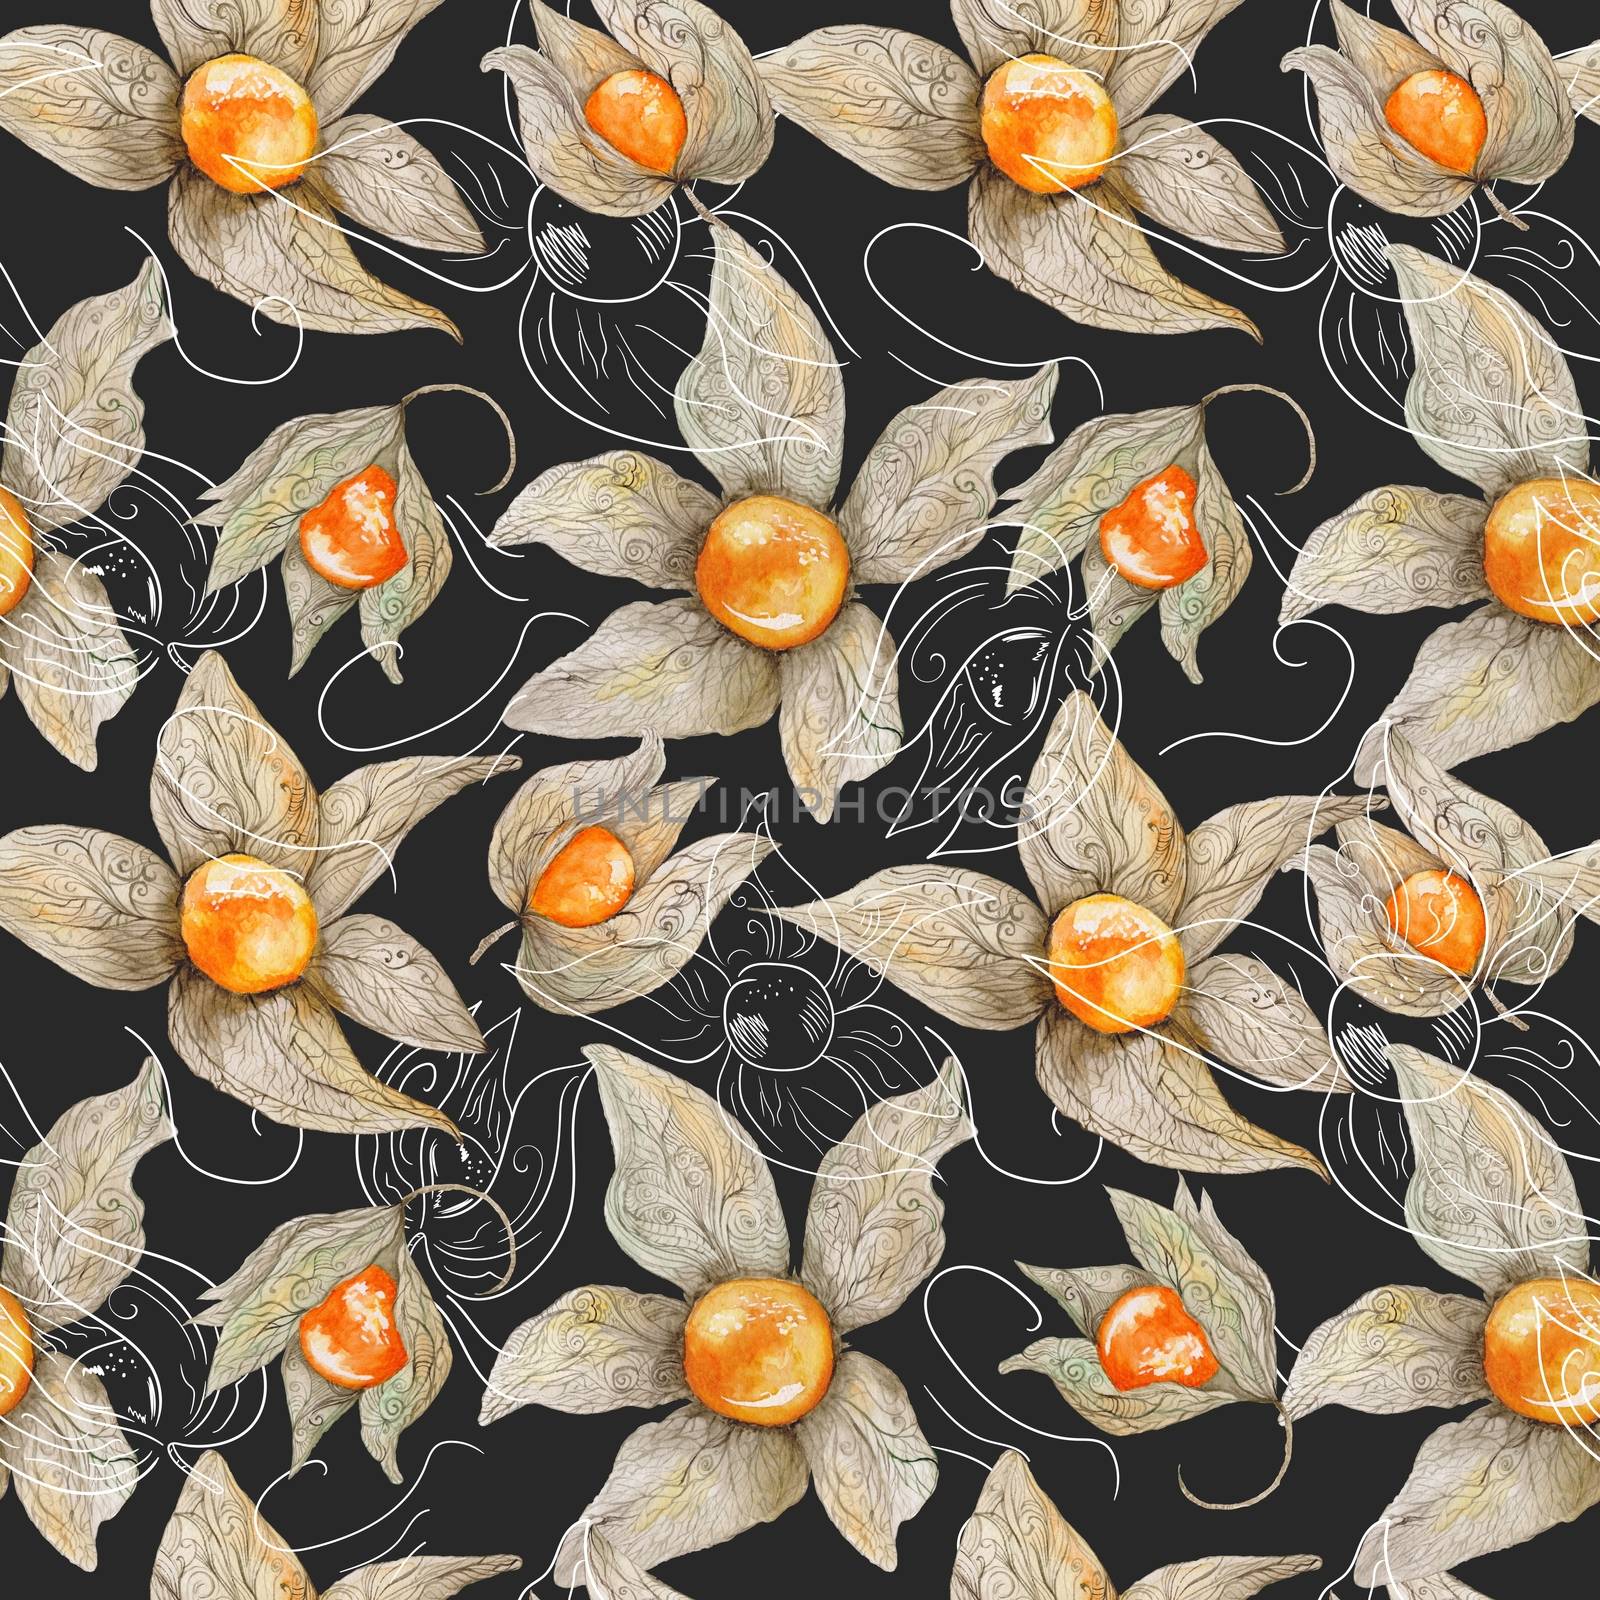 Colored aquarelle seamless texture with bright orange berries and pastel ornamental leafs on black background for menu, kitchen, cafe design